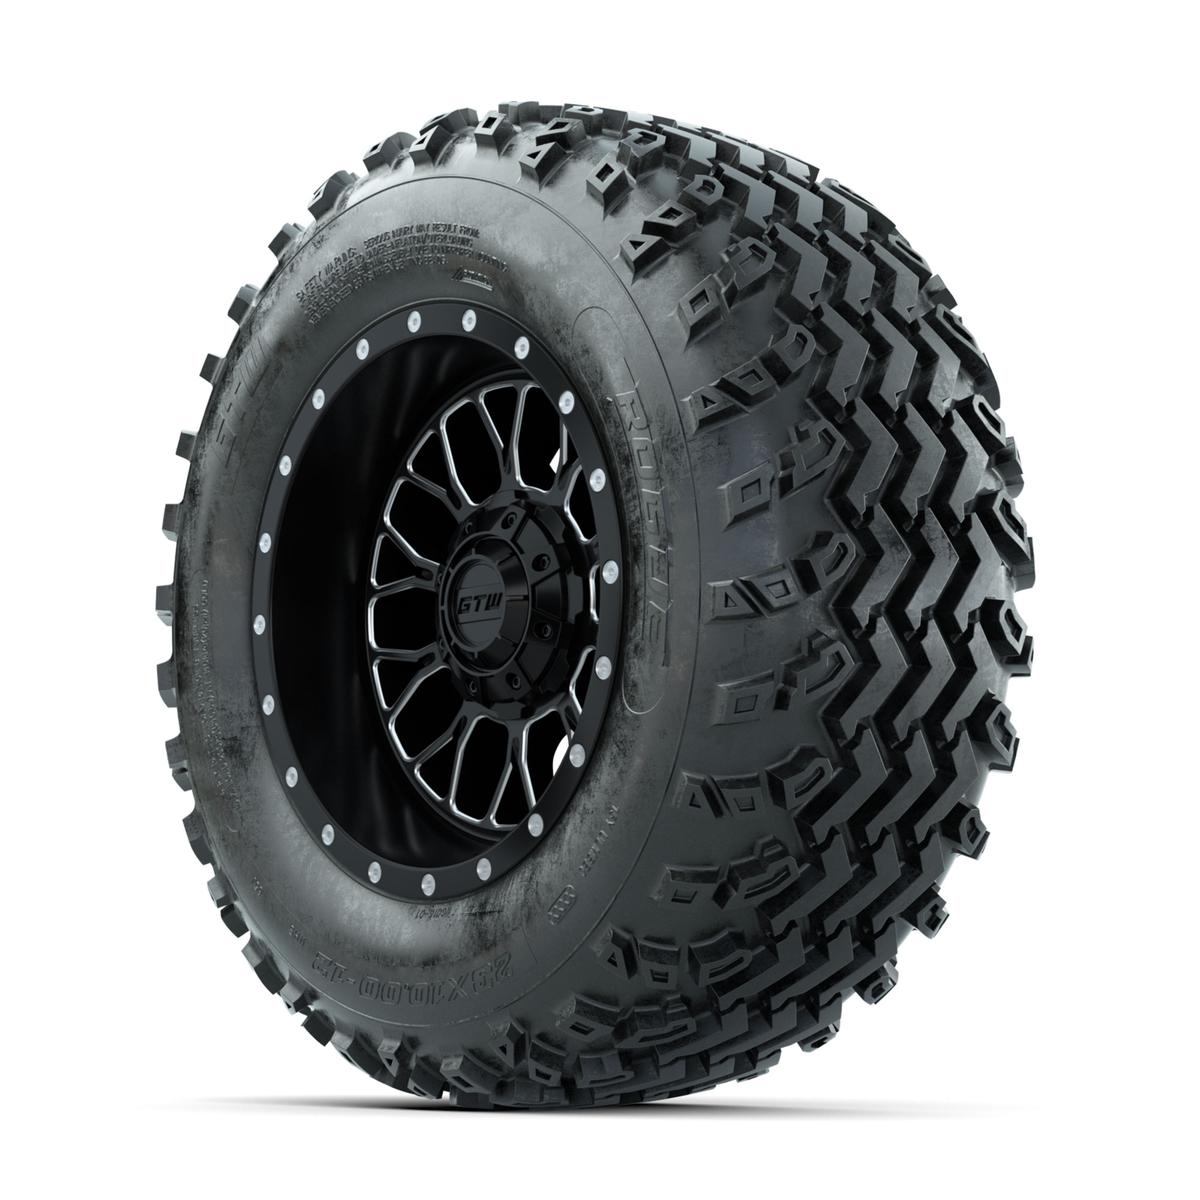 GTW Helix Machined/Black 12 in Wheels with 23x10.00-12 Rogue All Terrain Tires – Full Set